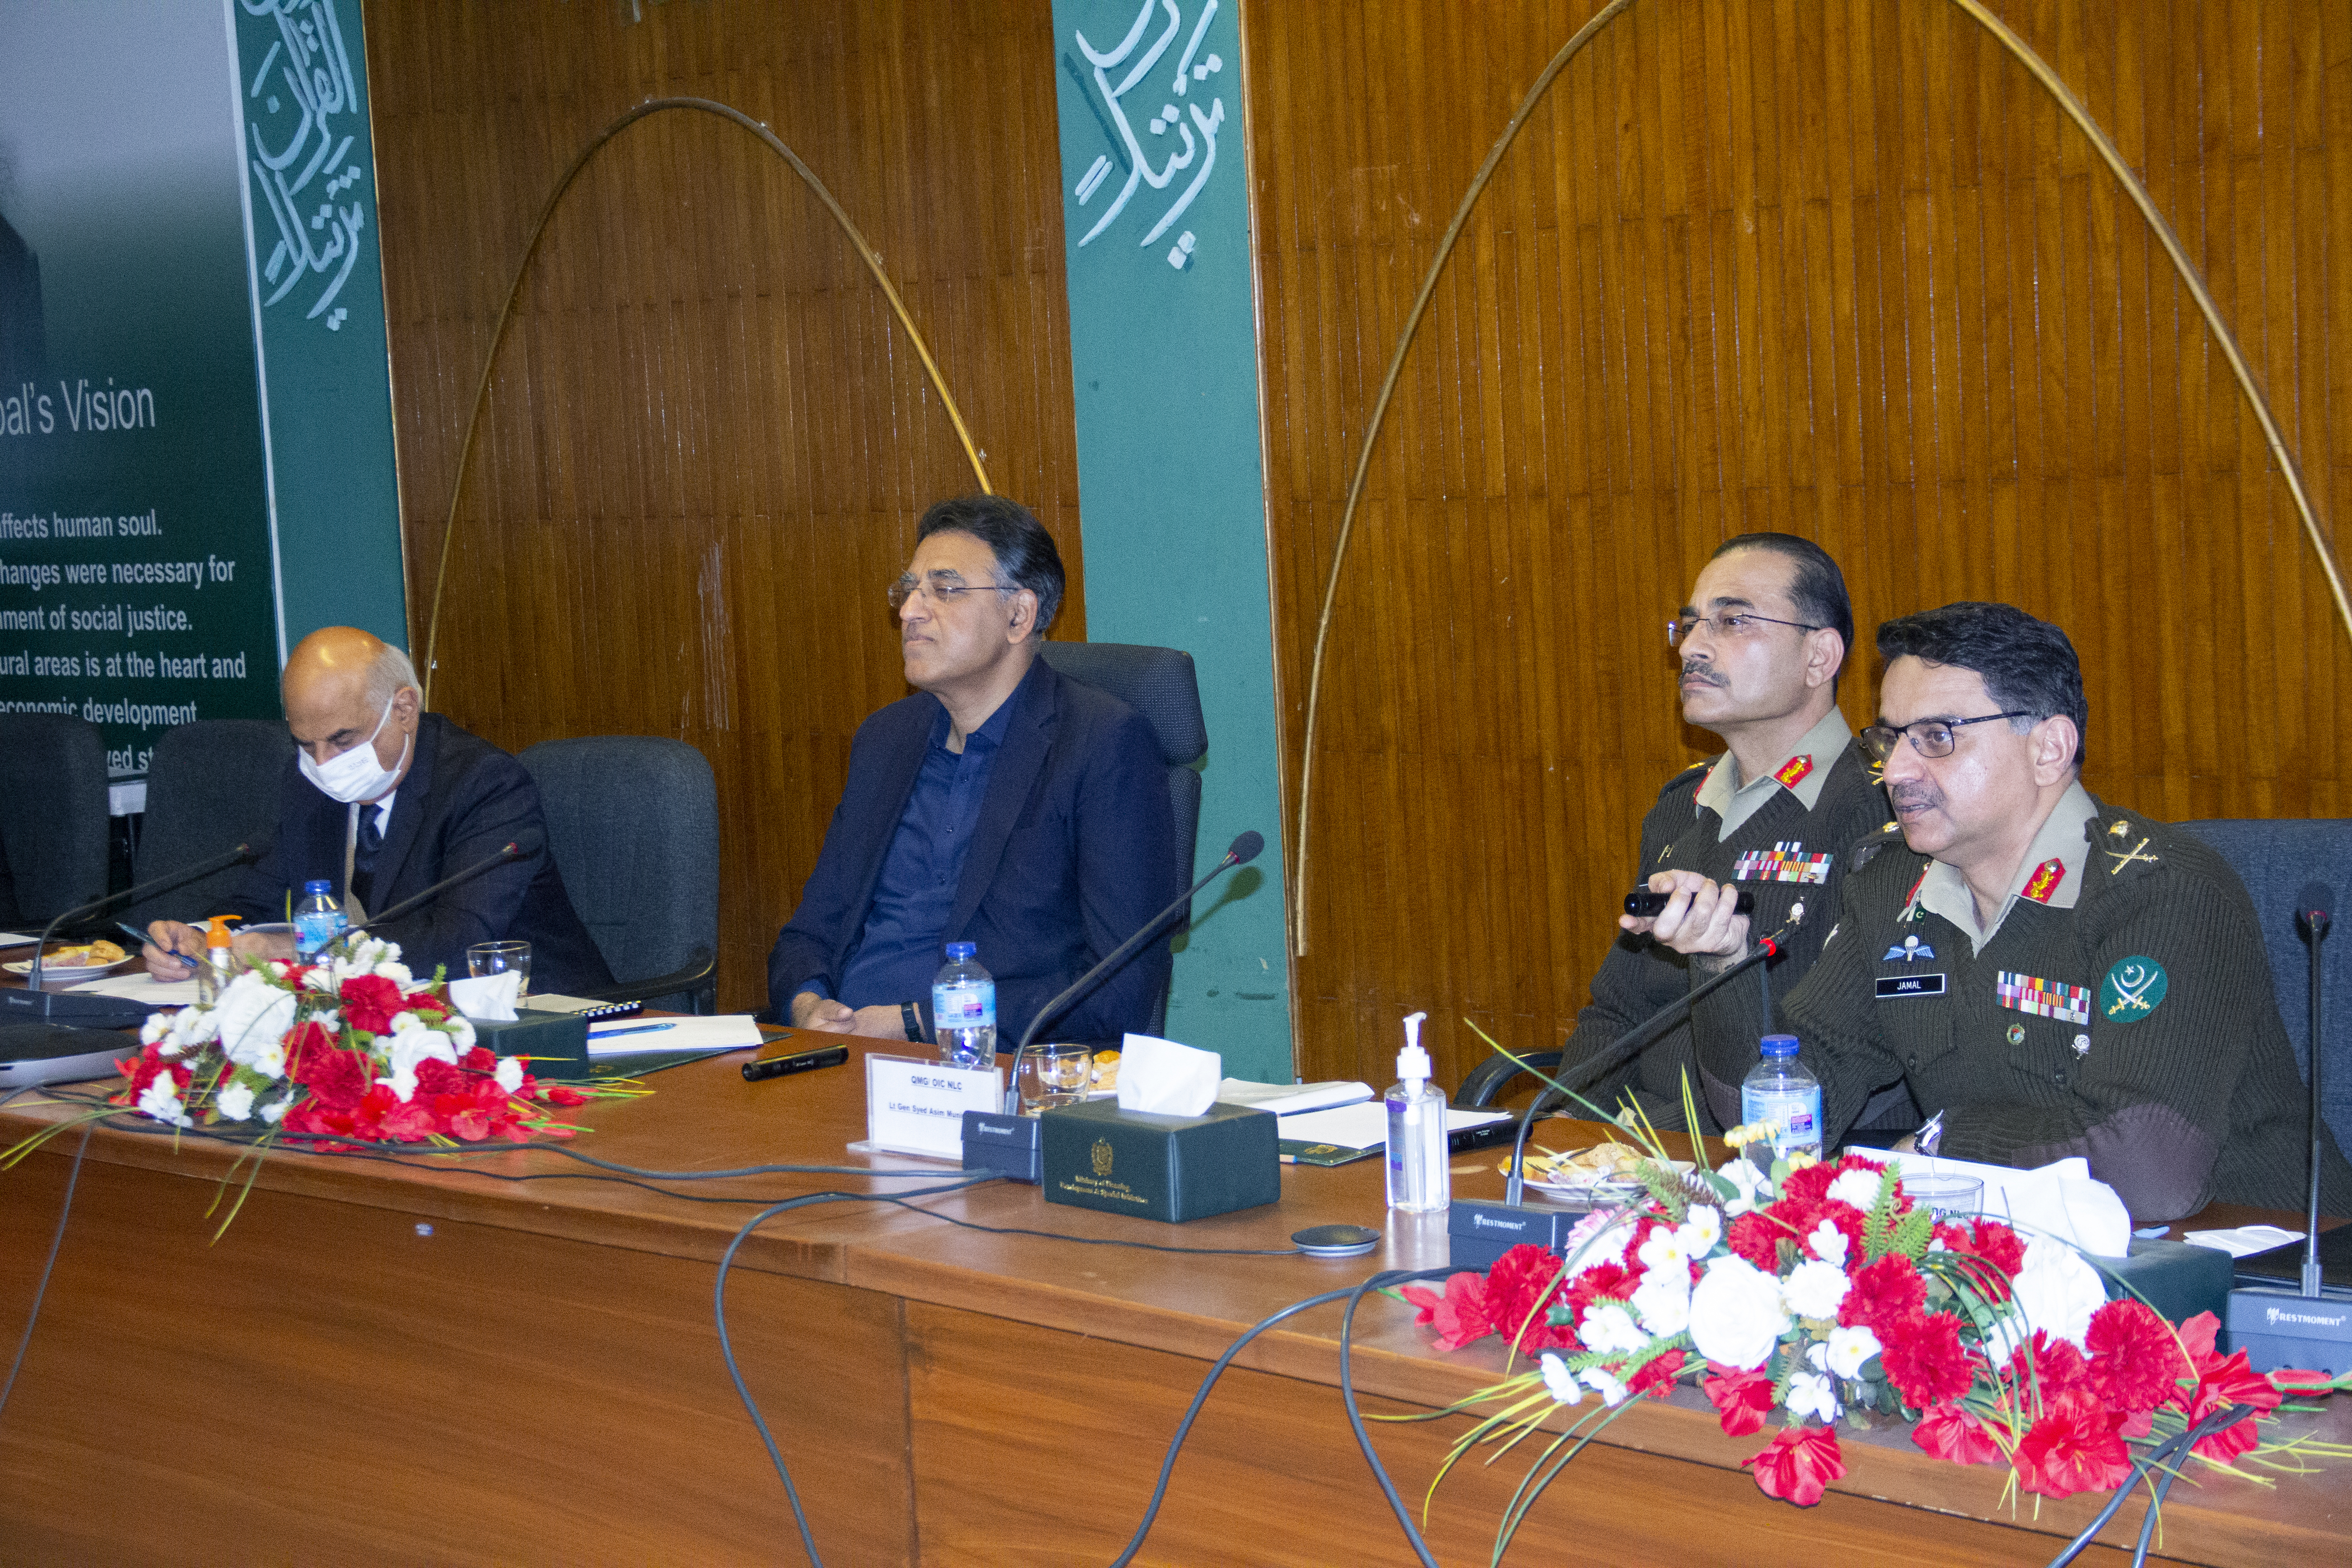 Federal Minister for Planning Development & Special Initiatives (Asad Umar lauds role of NLC in national development